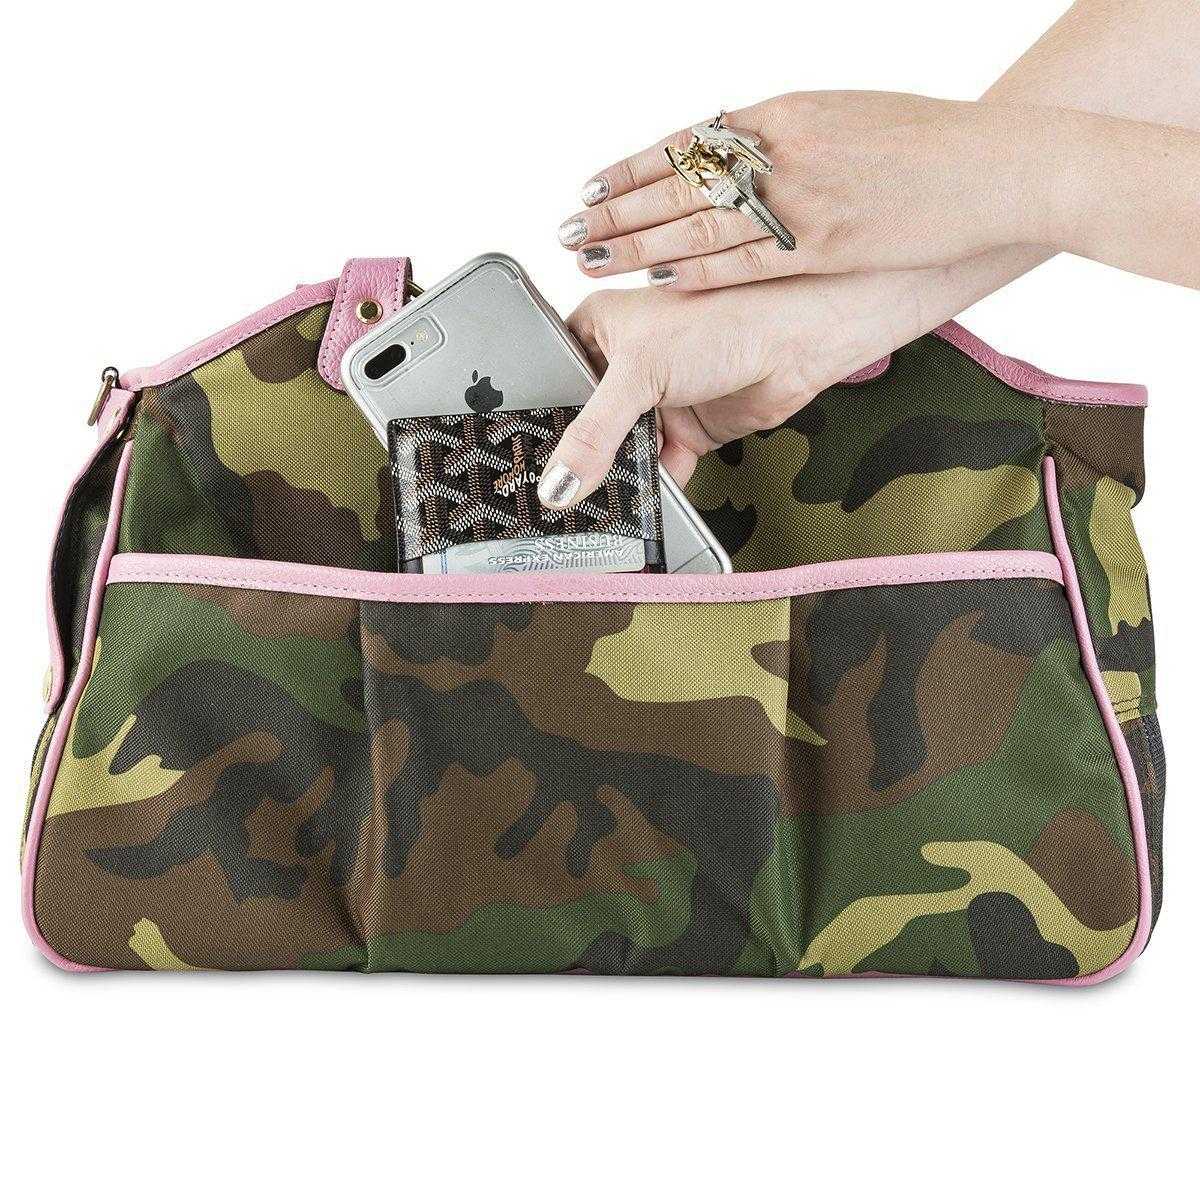 Designer Dog Carrier - Camo & Pink Metro Pet Carrier by Petote